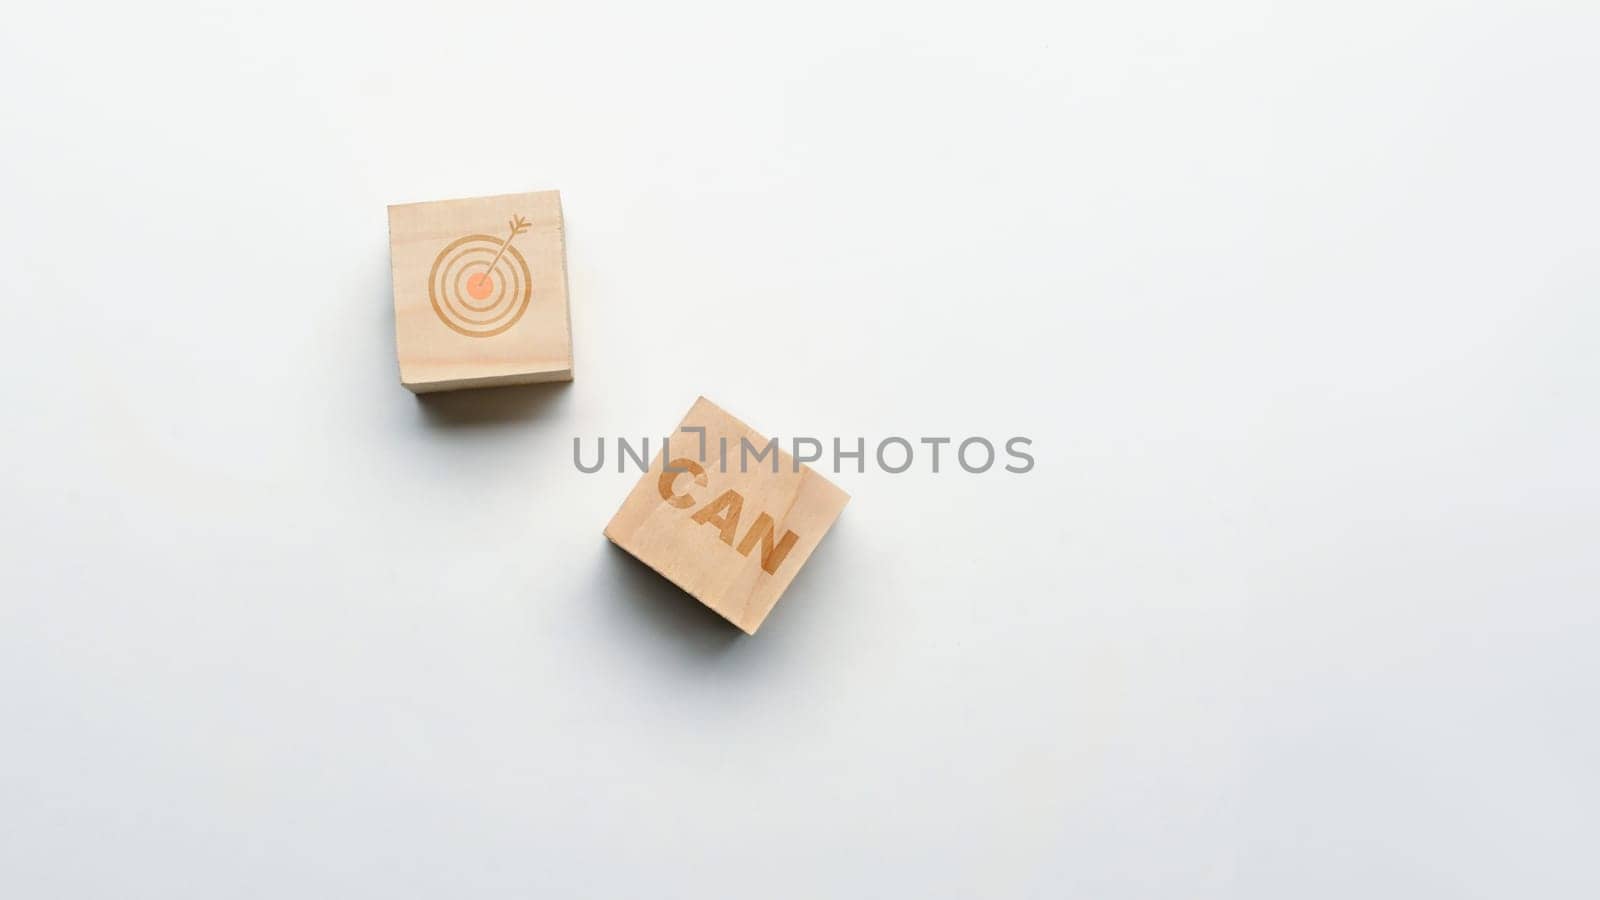 CAN word on wooden cube with target icon on white background. Motivational and inspirational concept by prathanchorruangsak